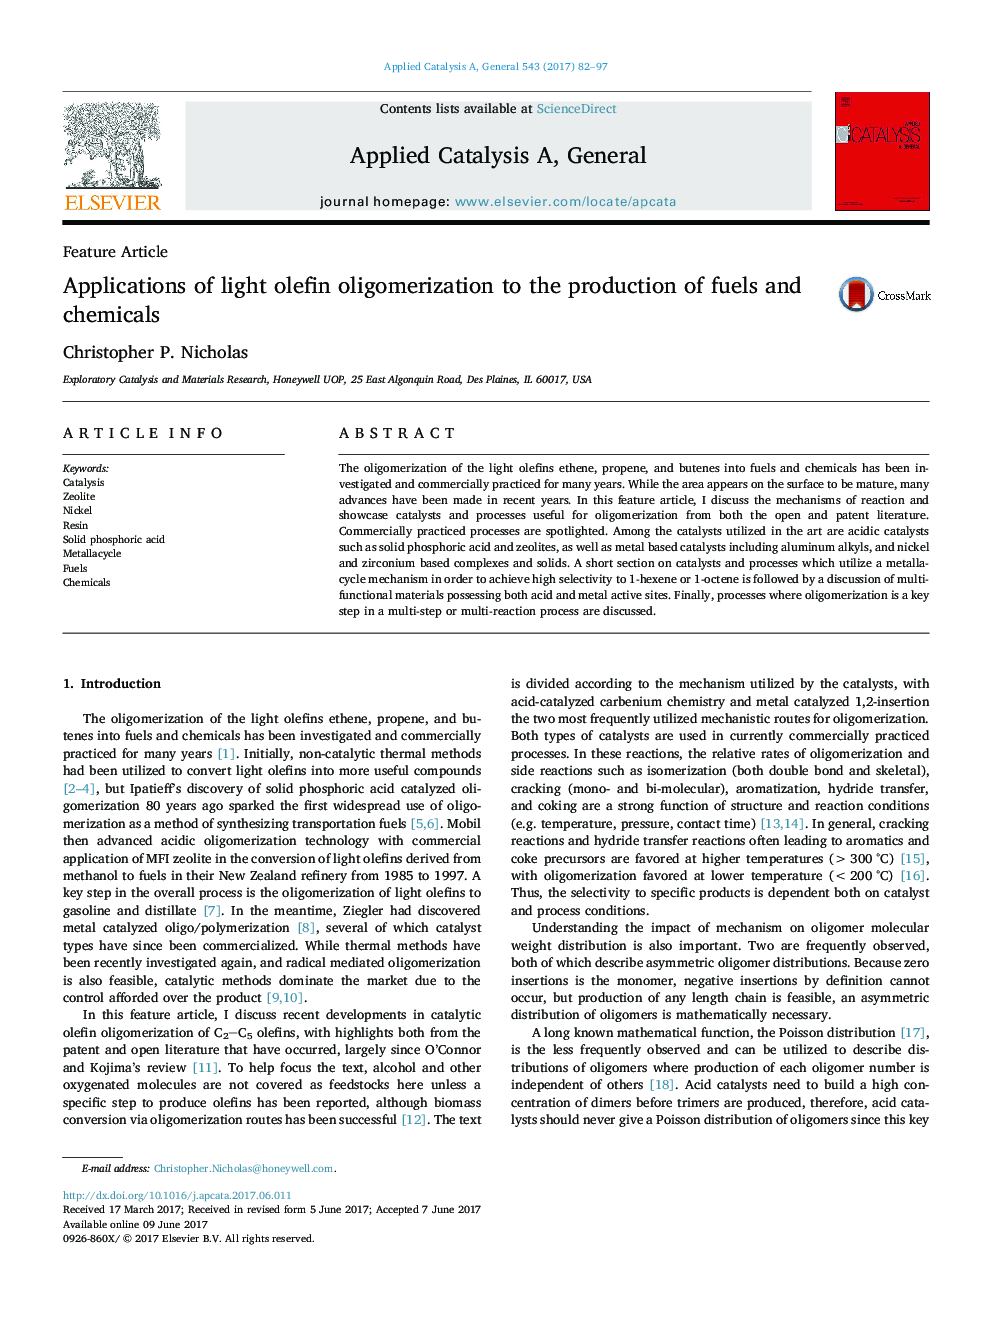 Applications of light olefin oligomerization to the production of fuels and chemicals